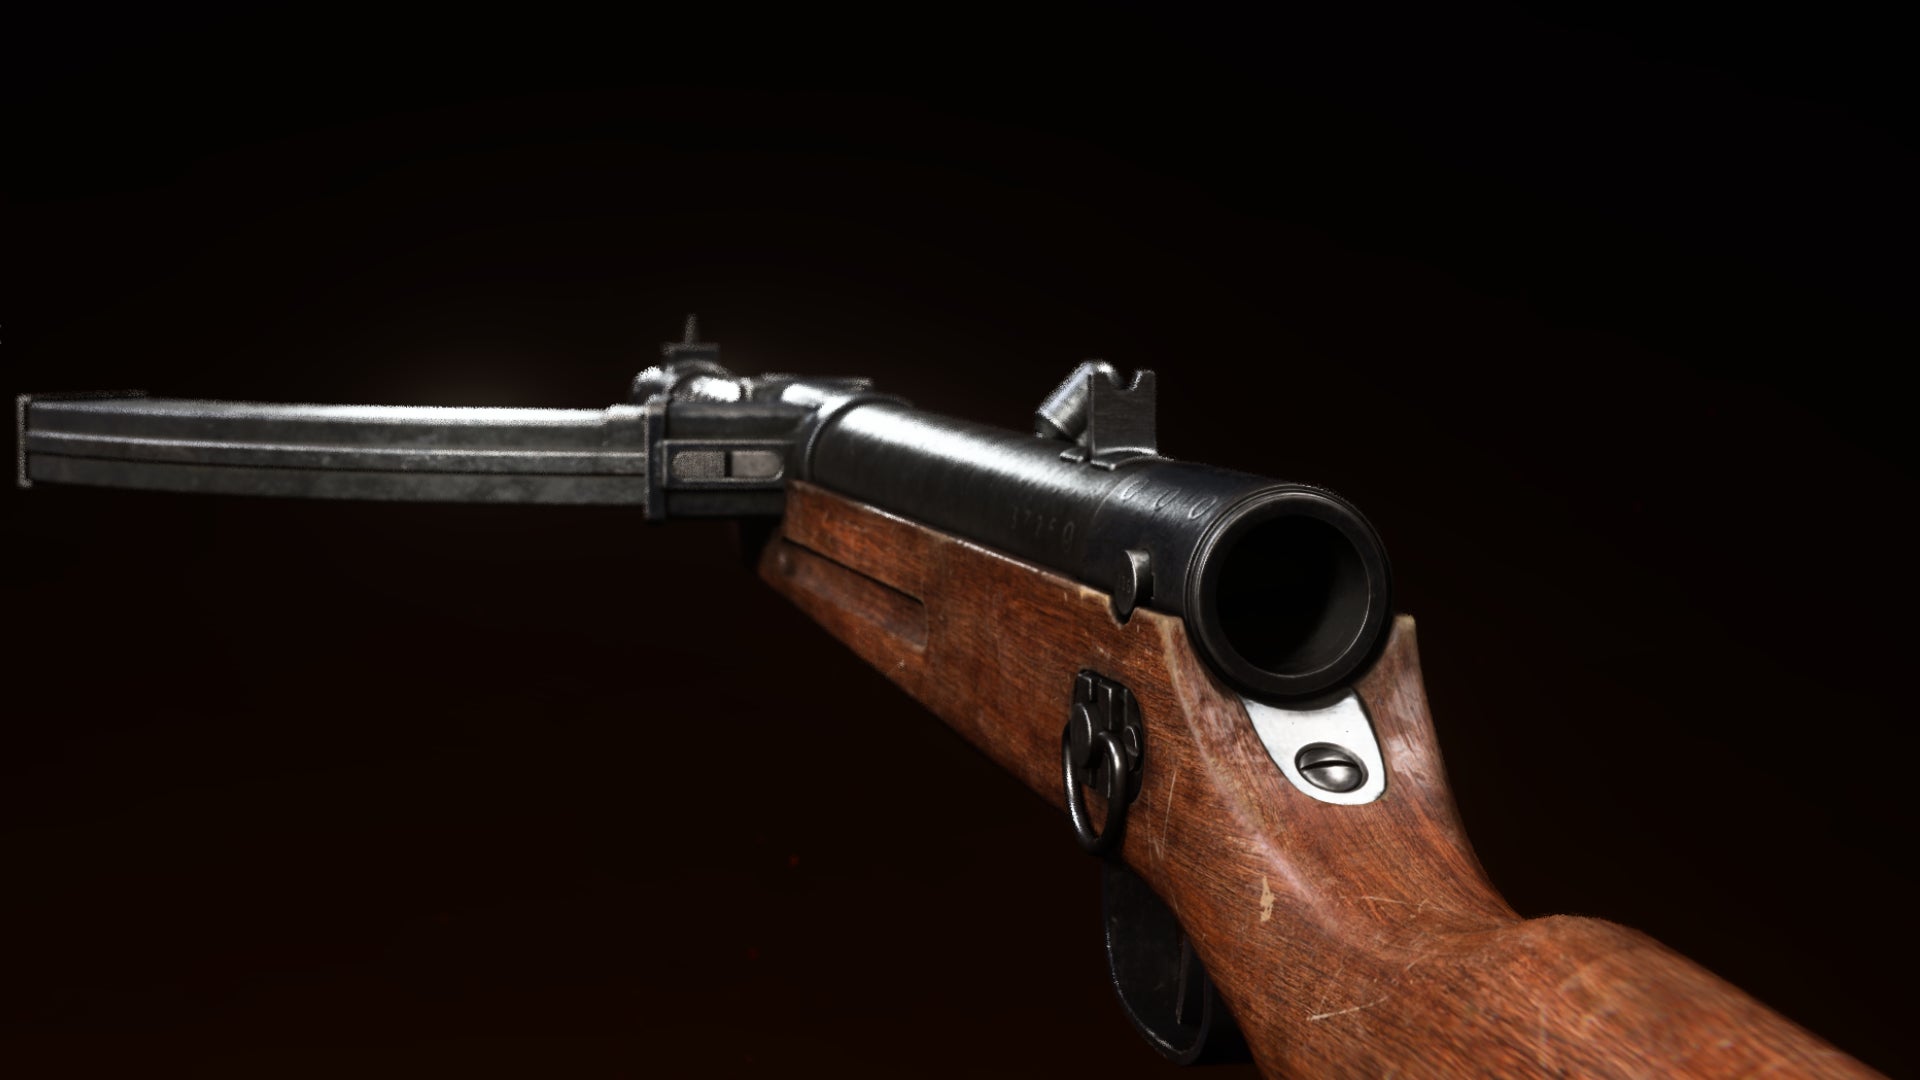 A render of the Type 100 in Call Of Duty: Vanguard, as seen from the Gunsmith preview animation screen.